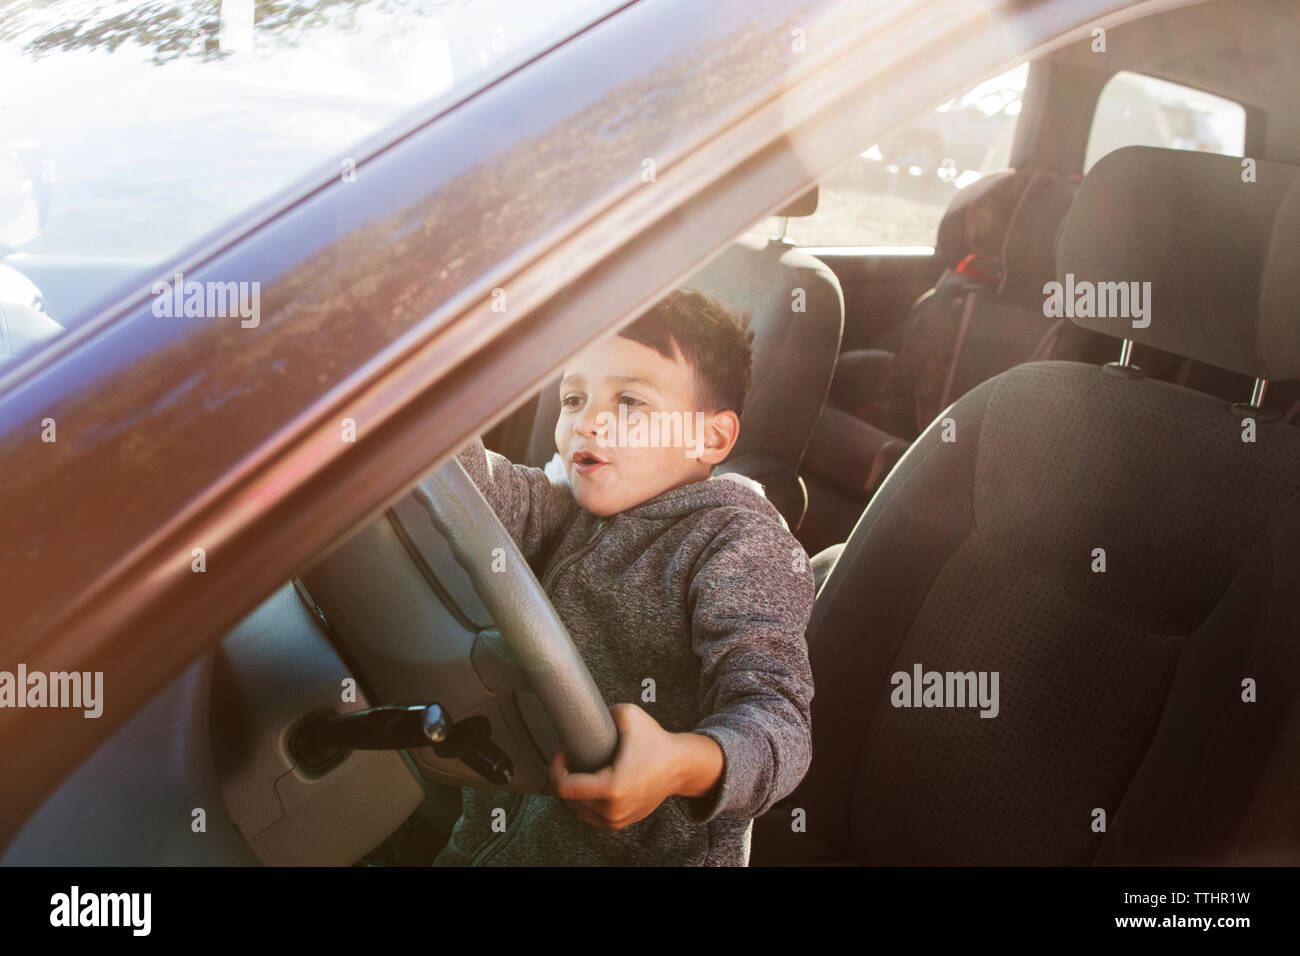 Boy pretending to drive while sitting in car Stock Photo